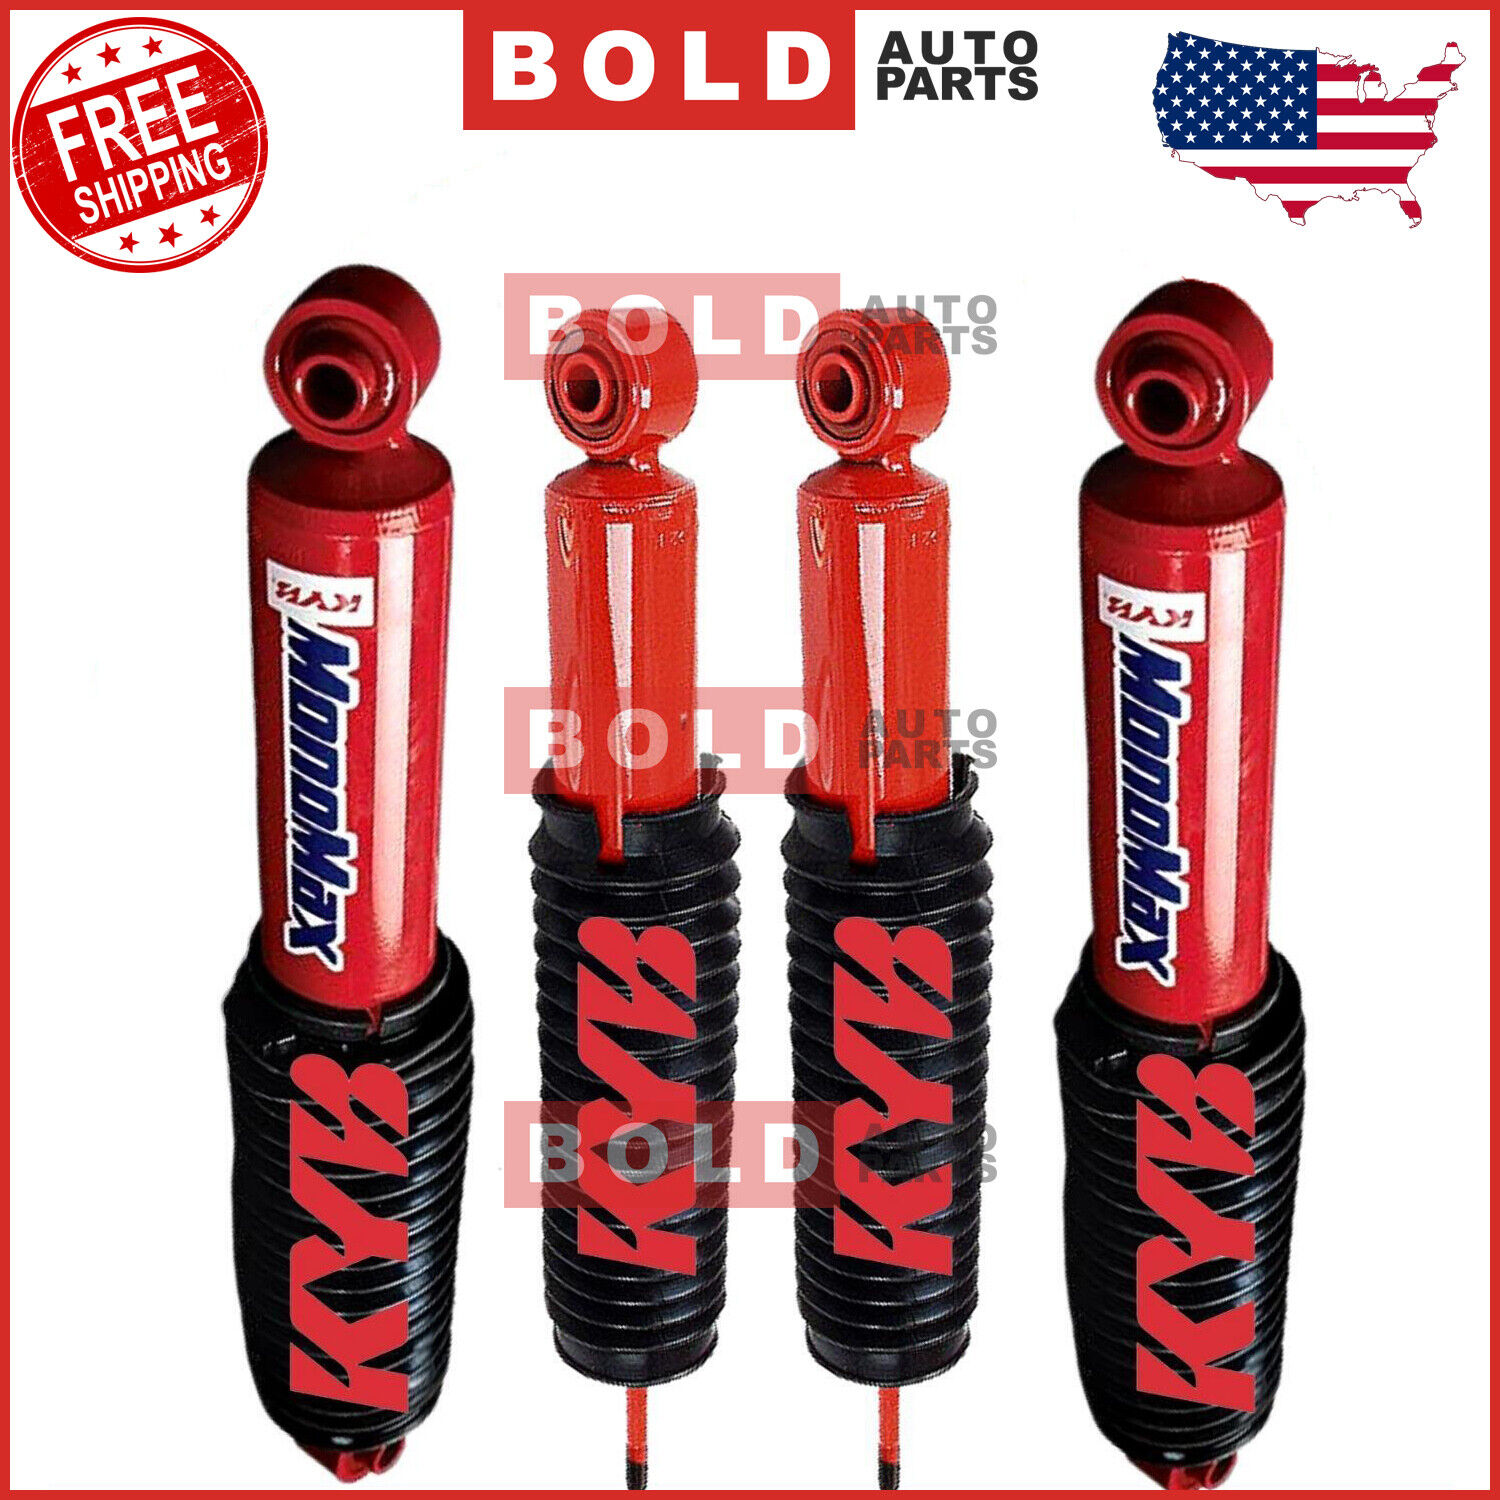 Genuine KYB 4 MONOMAX Max Duty Upgrade SHOCKS Front Rear For HUMMER H2 2003-2007